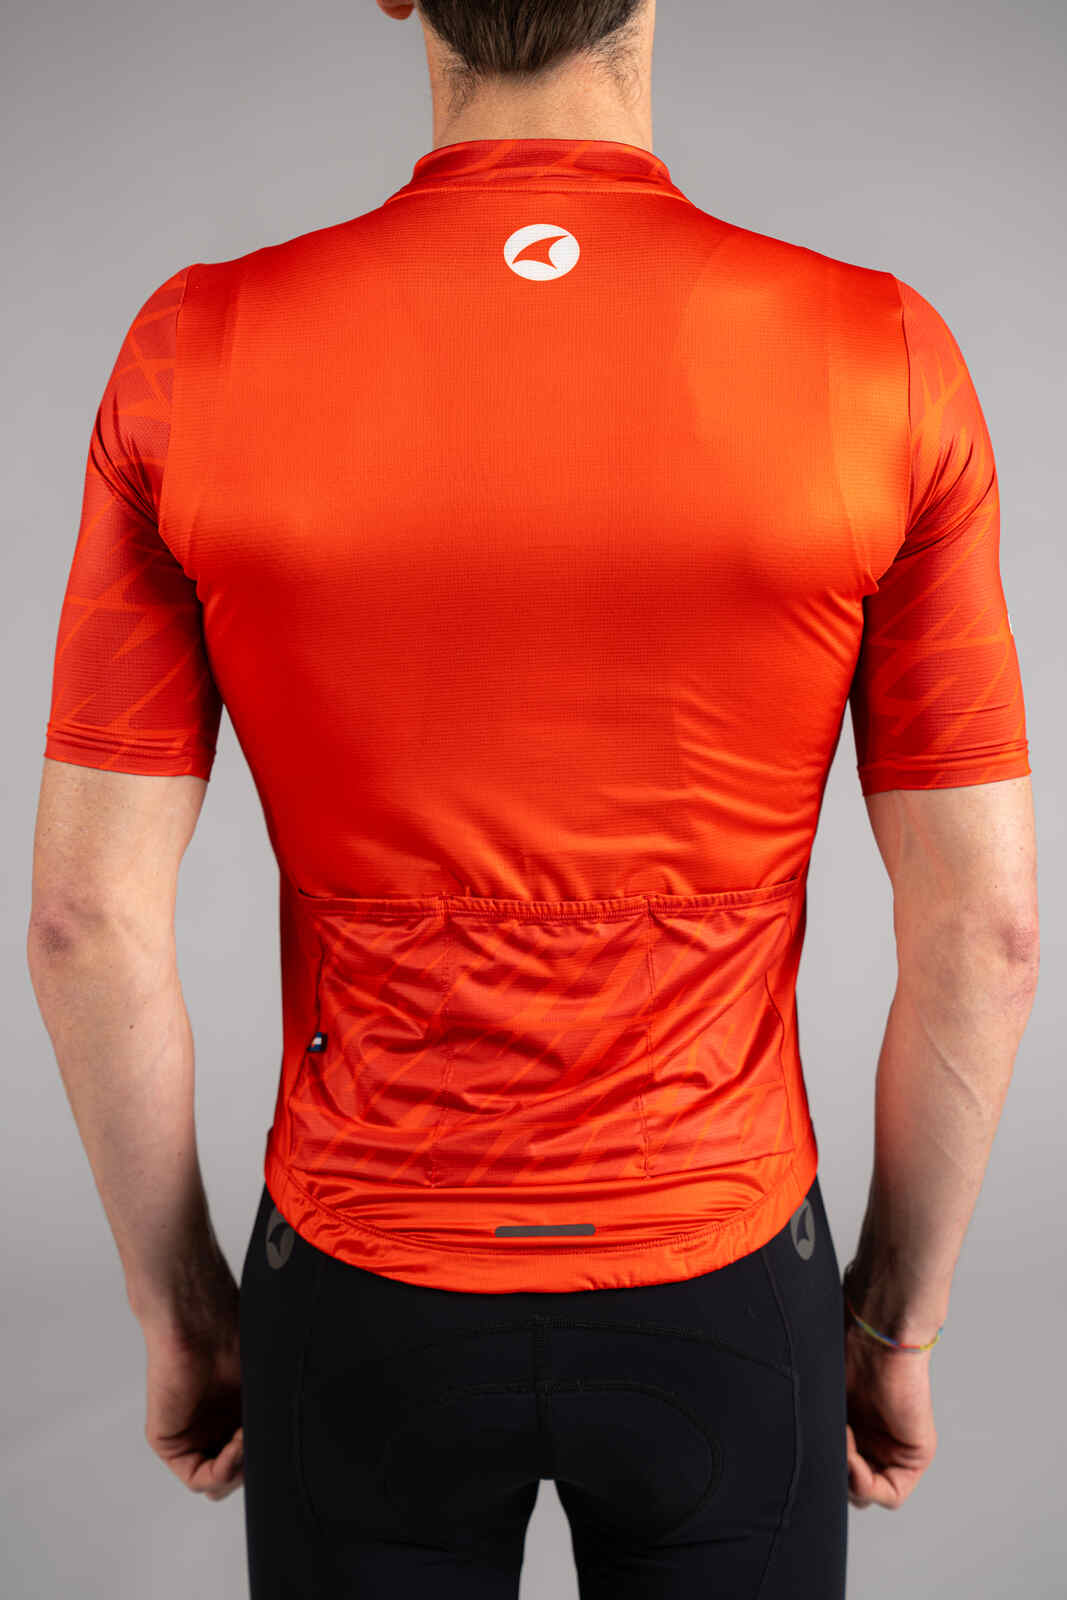 Men's Red Ascent Aero Cycling Jersey - Back Pockets